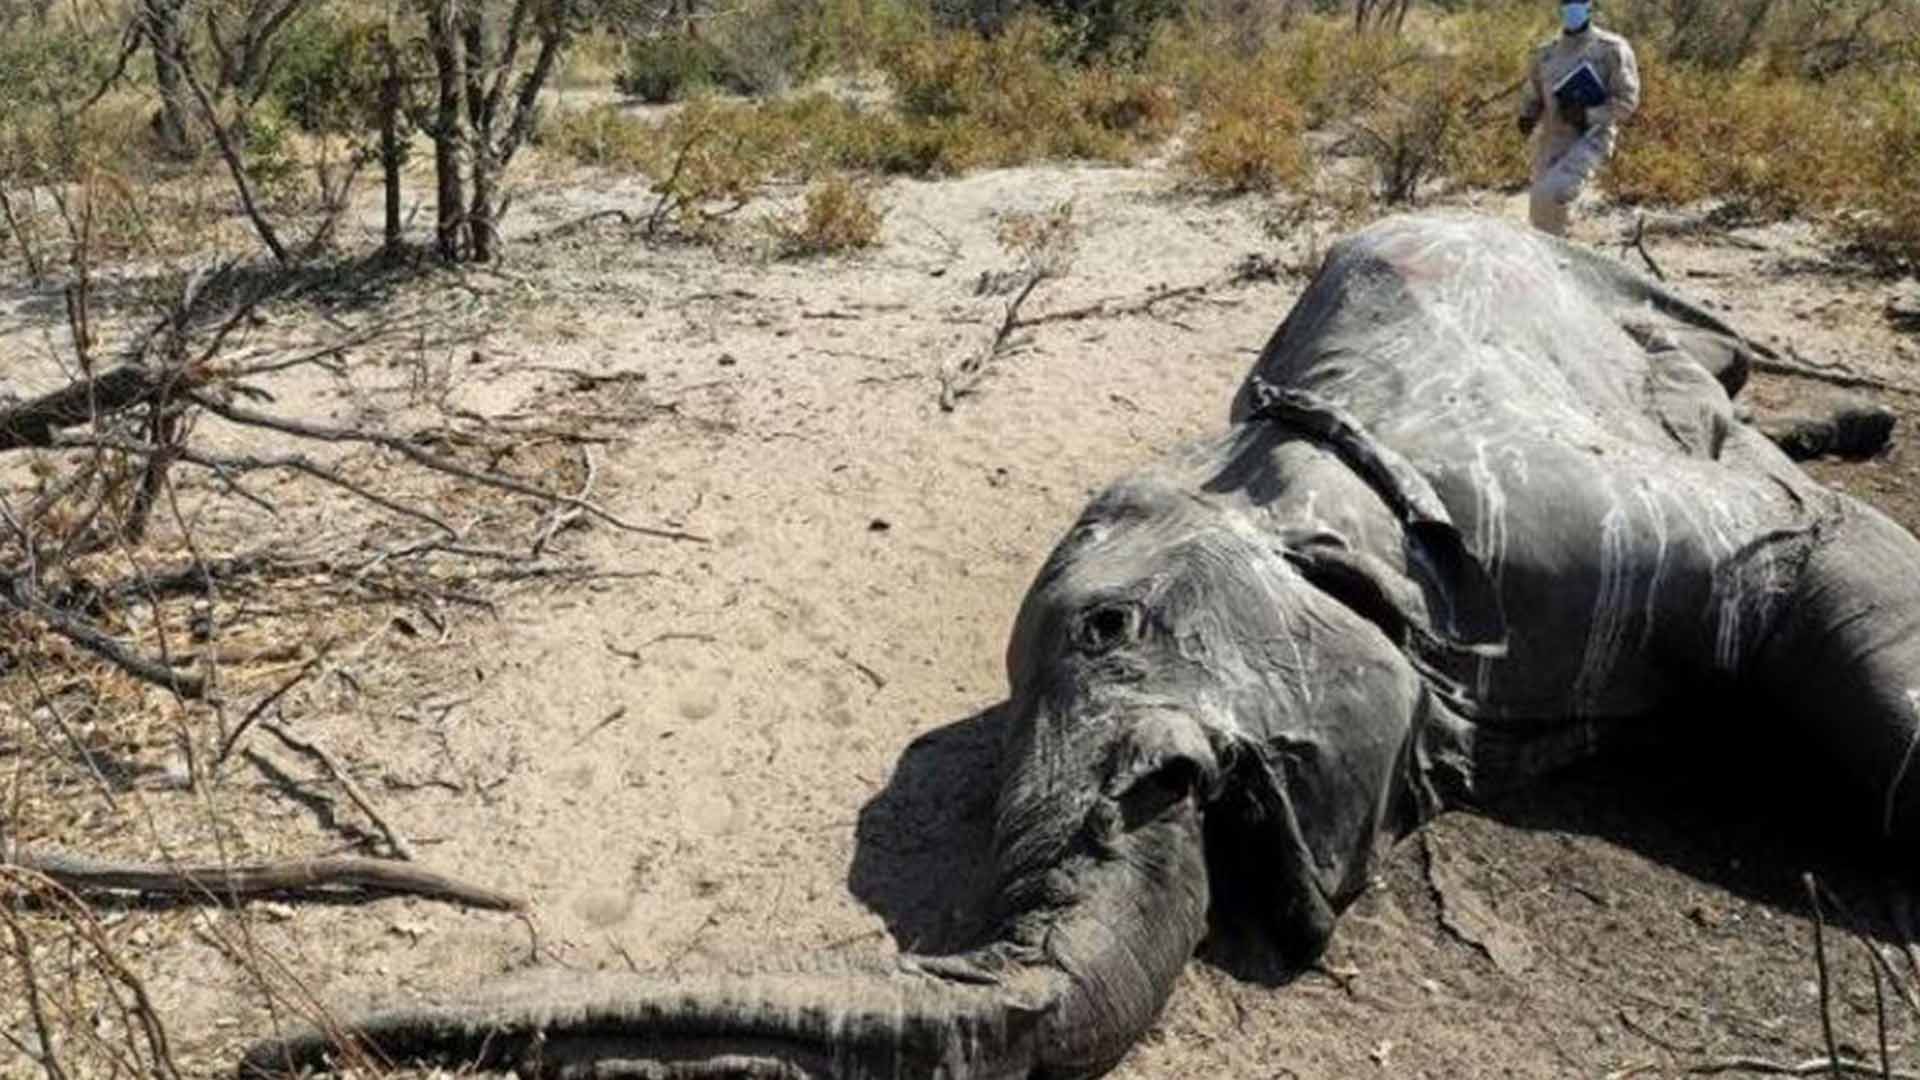 11 elephants die in Zimbabwe's protected forest